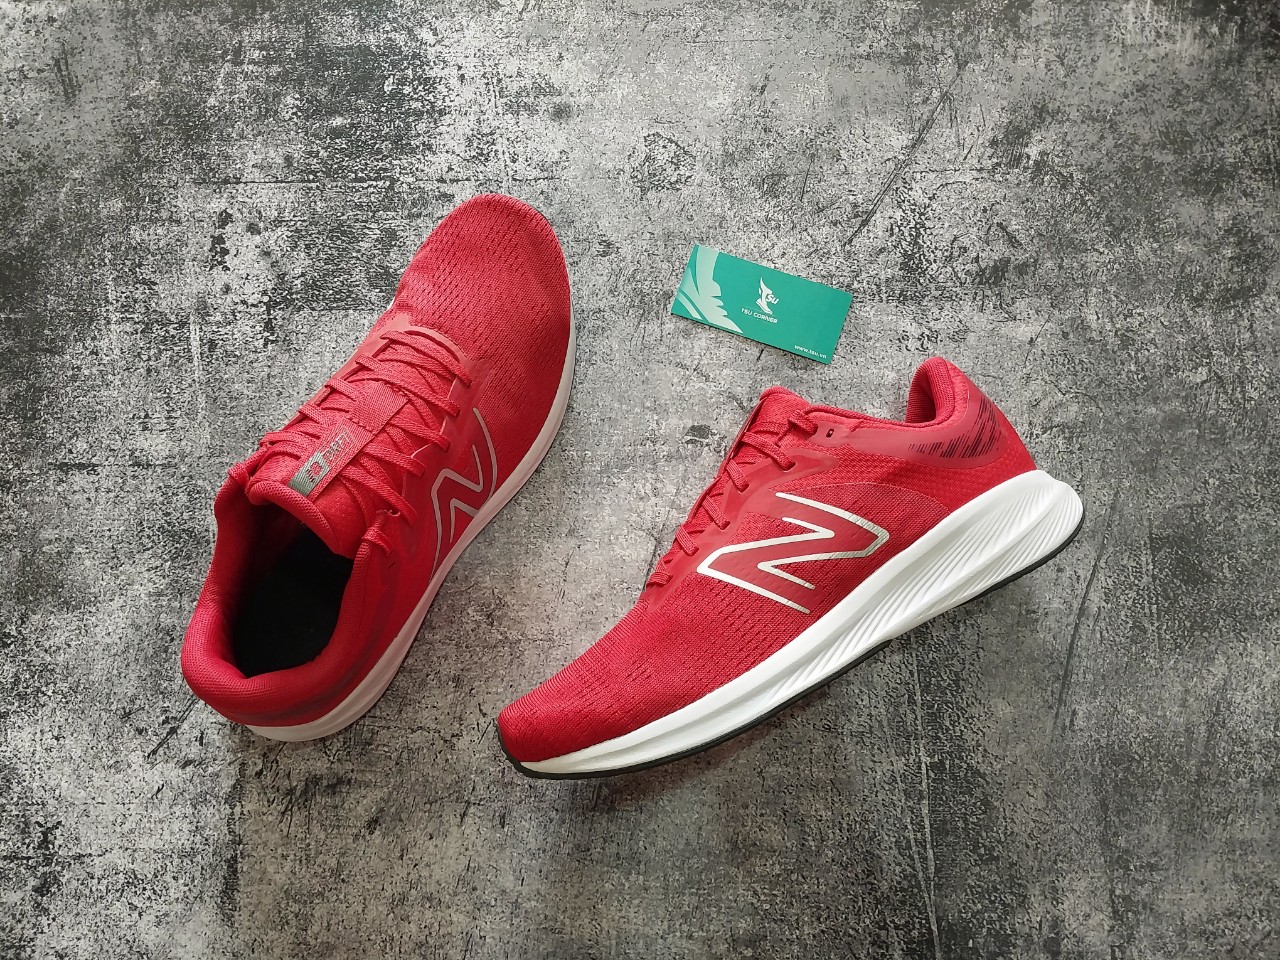 Giày thể thao New Balance nam - Red